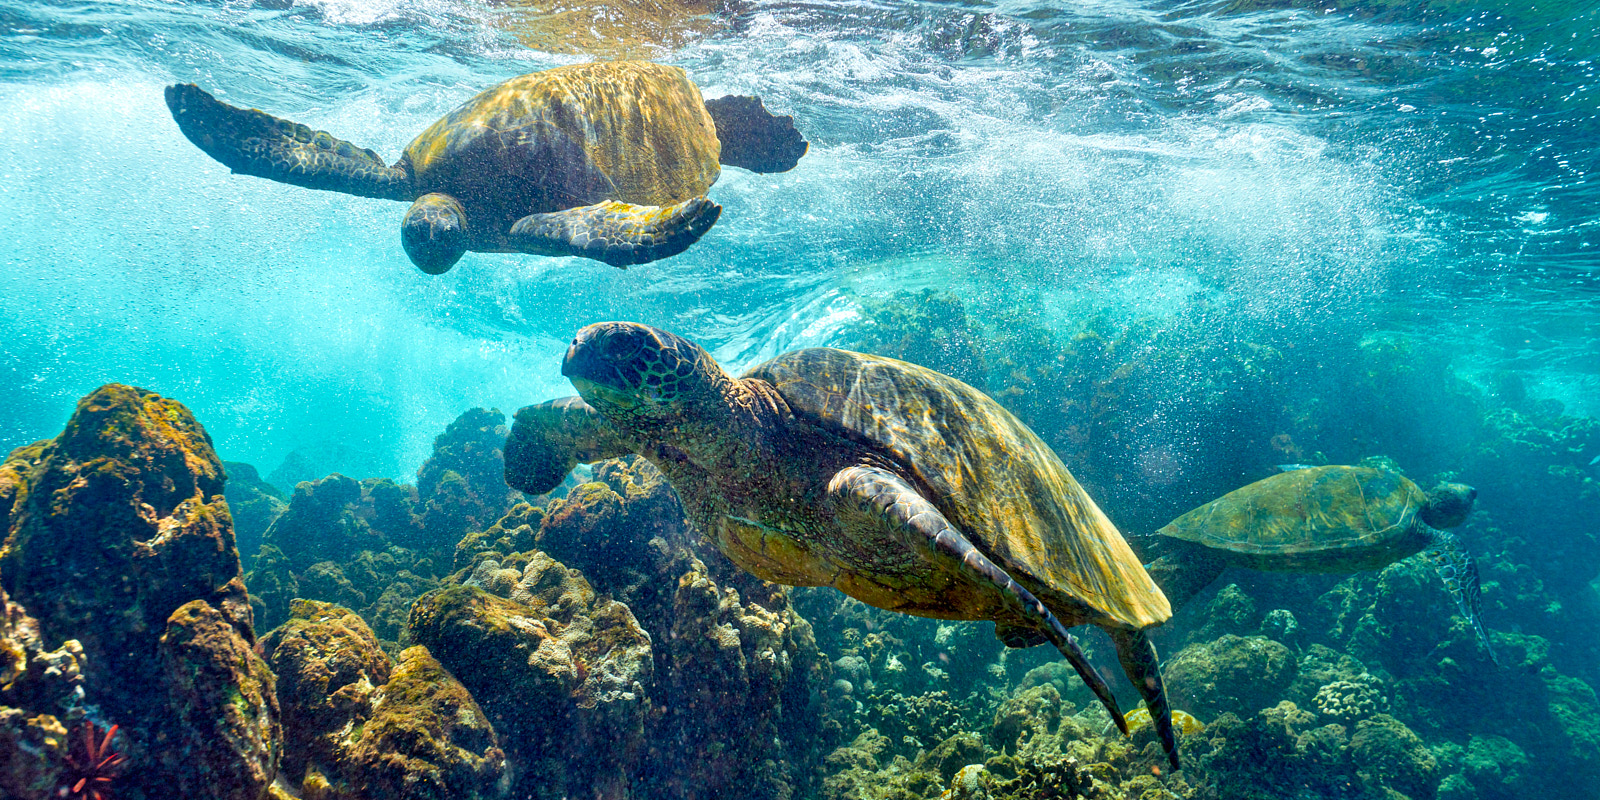 underwater panoramic photograph of green hawaiian sea turtles also known as Honu.  Captured by fine art photographer Andrew Shoemaker